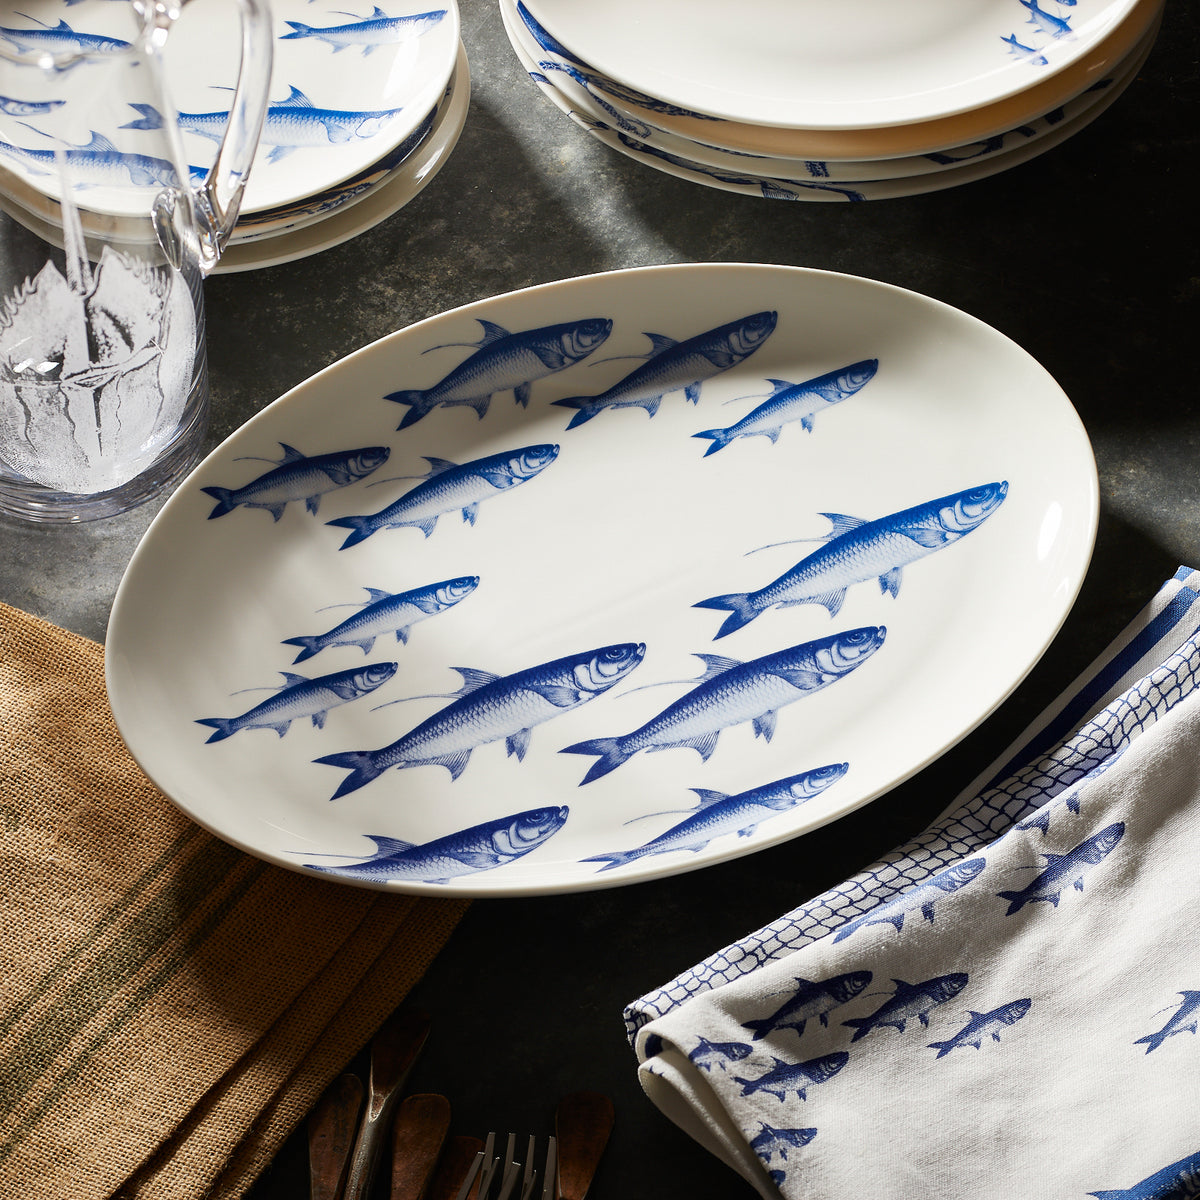 A blue and white porcelain platter with a School of Fish pattern on a zinc table from Caskata.